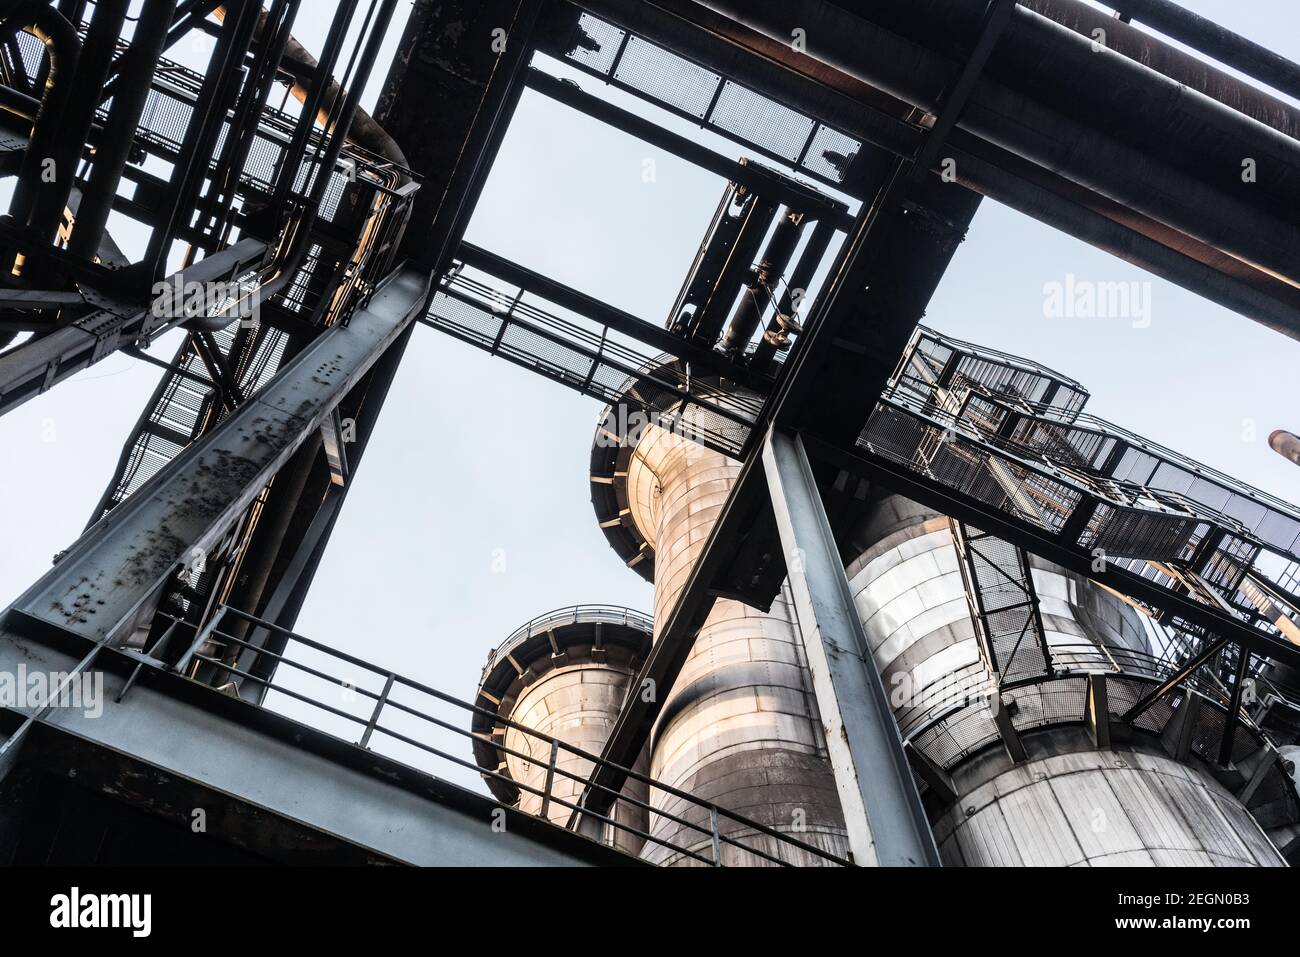 Landschaftspark Duisburg-Nord is a public park where visitors can explore a coal and iron works site that was closed down in 1985. It was transformed Stock Photo